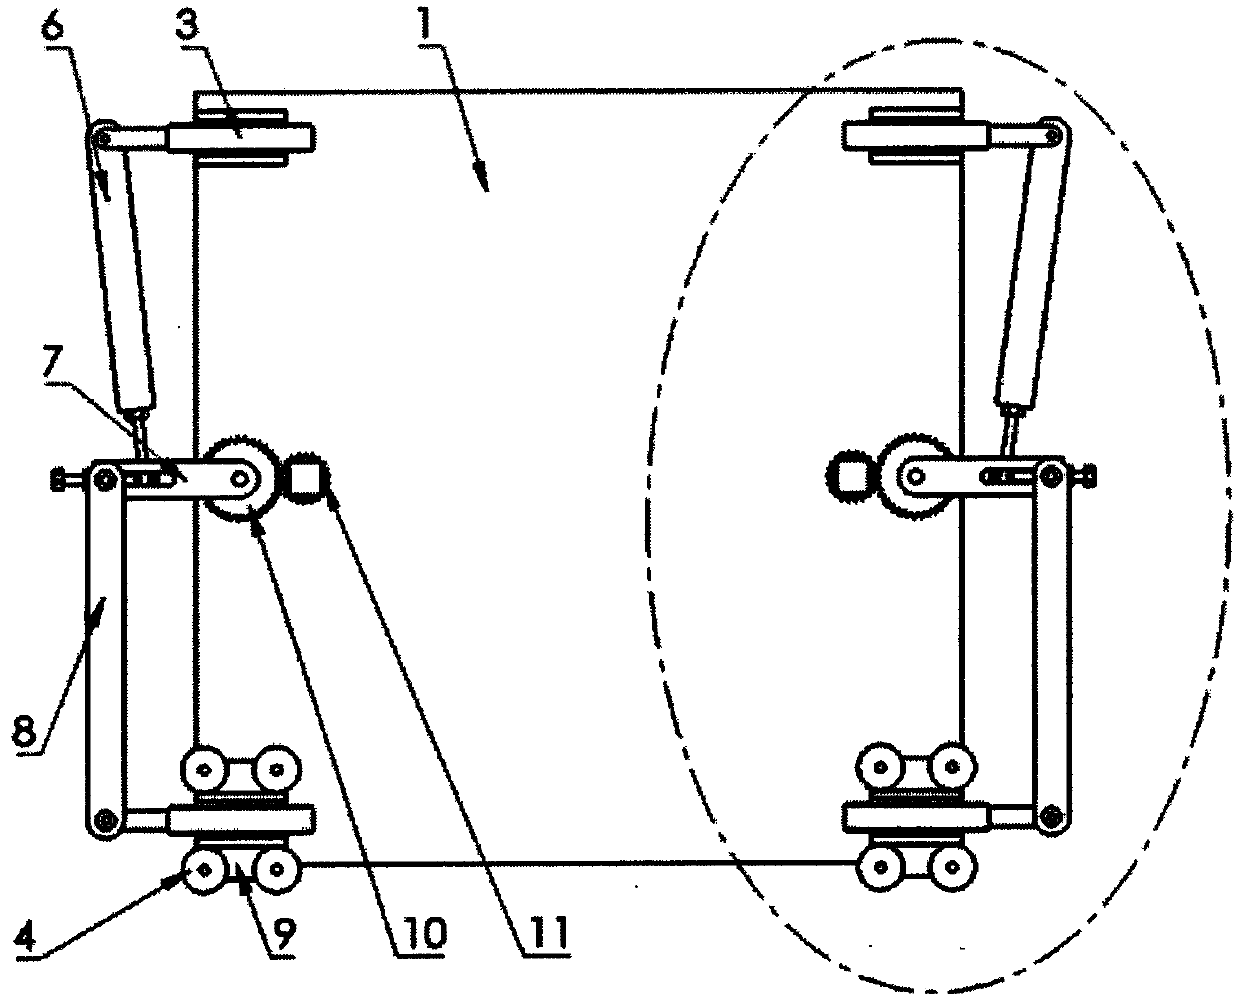 Annular rail guide vehicle active steering device adapting to different rail radii